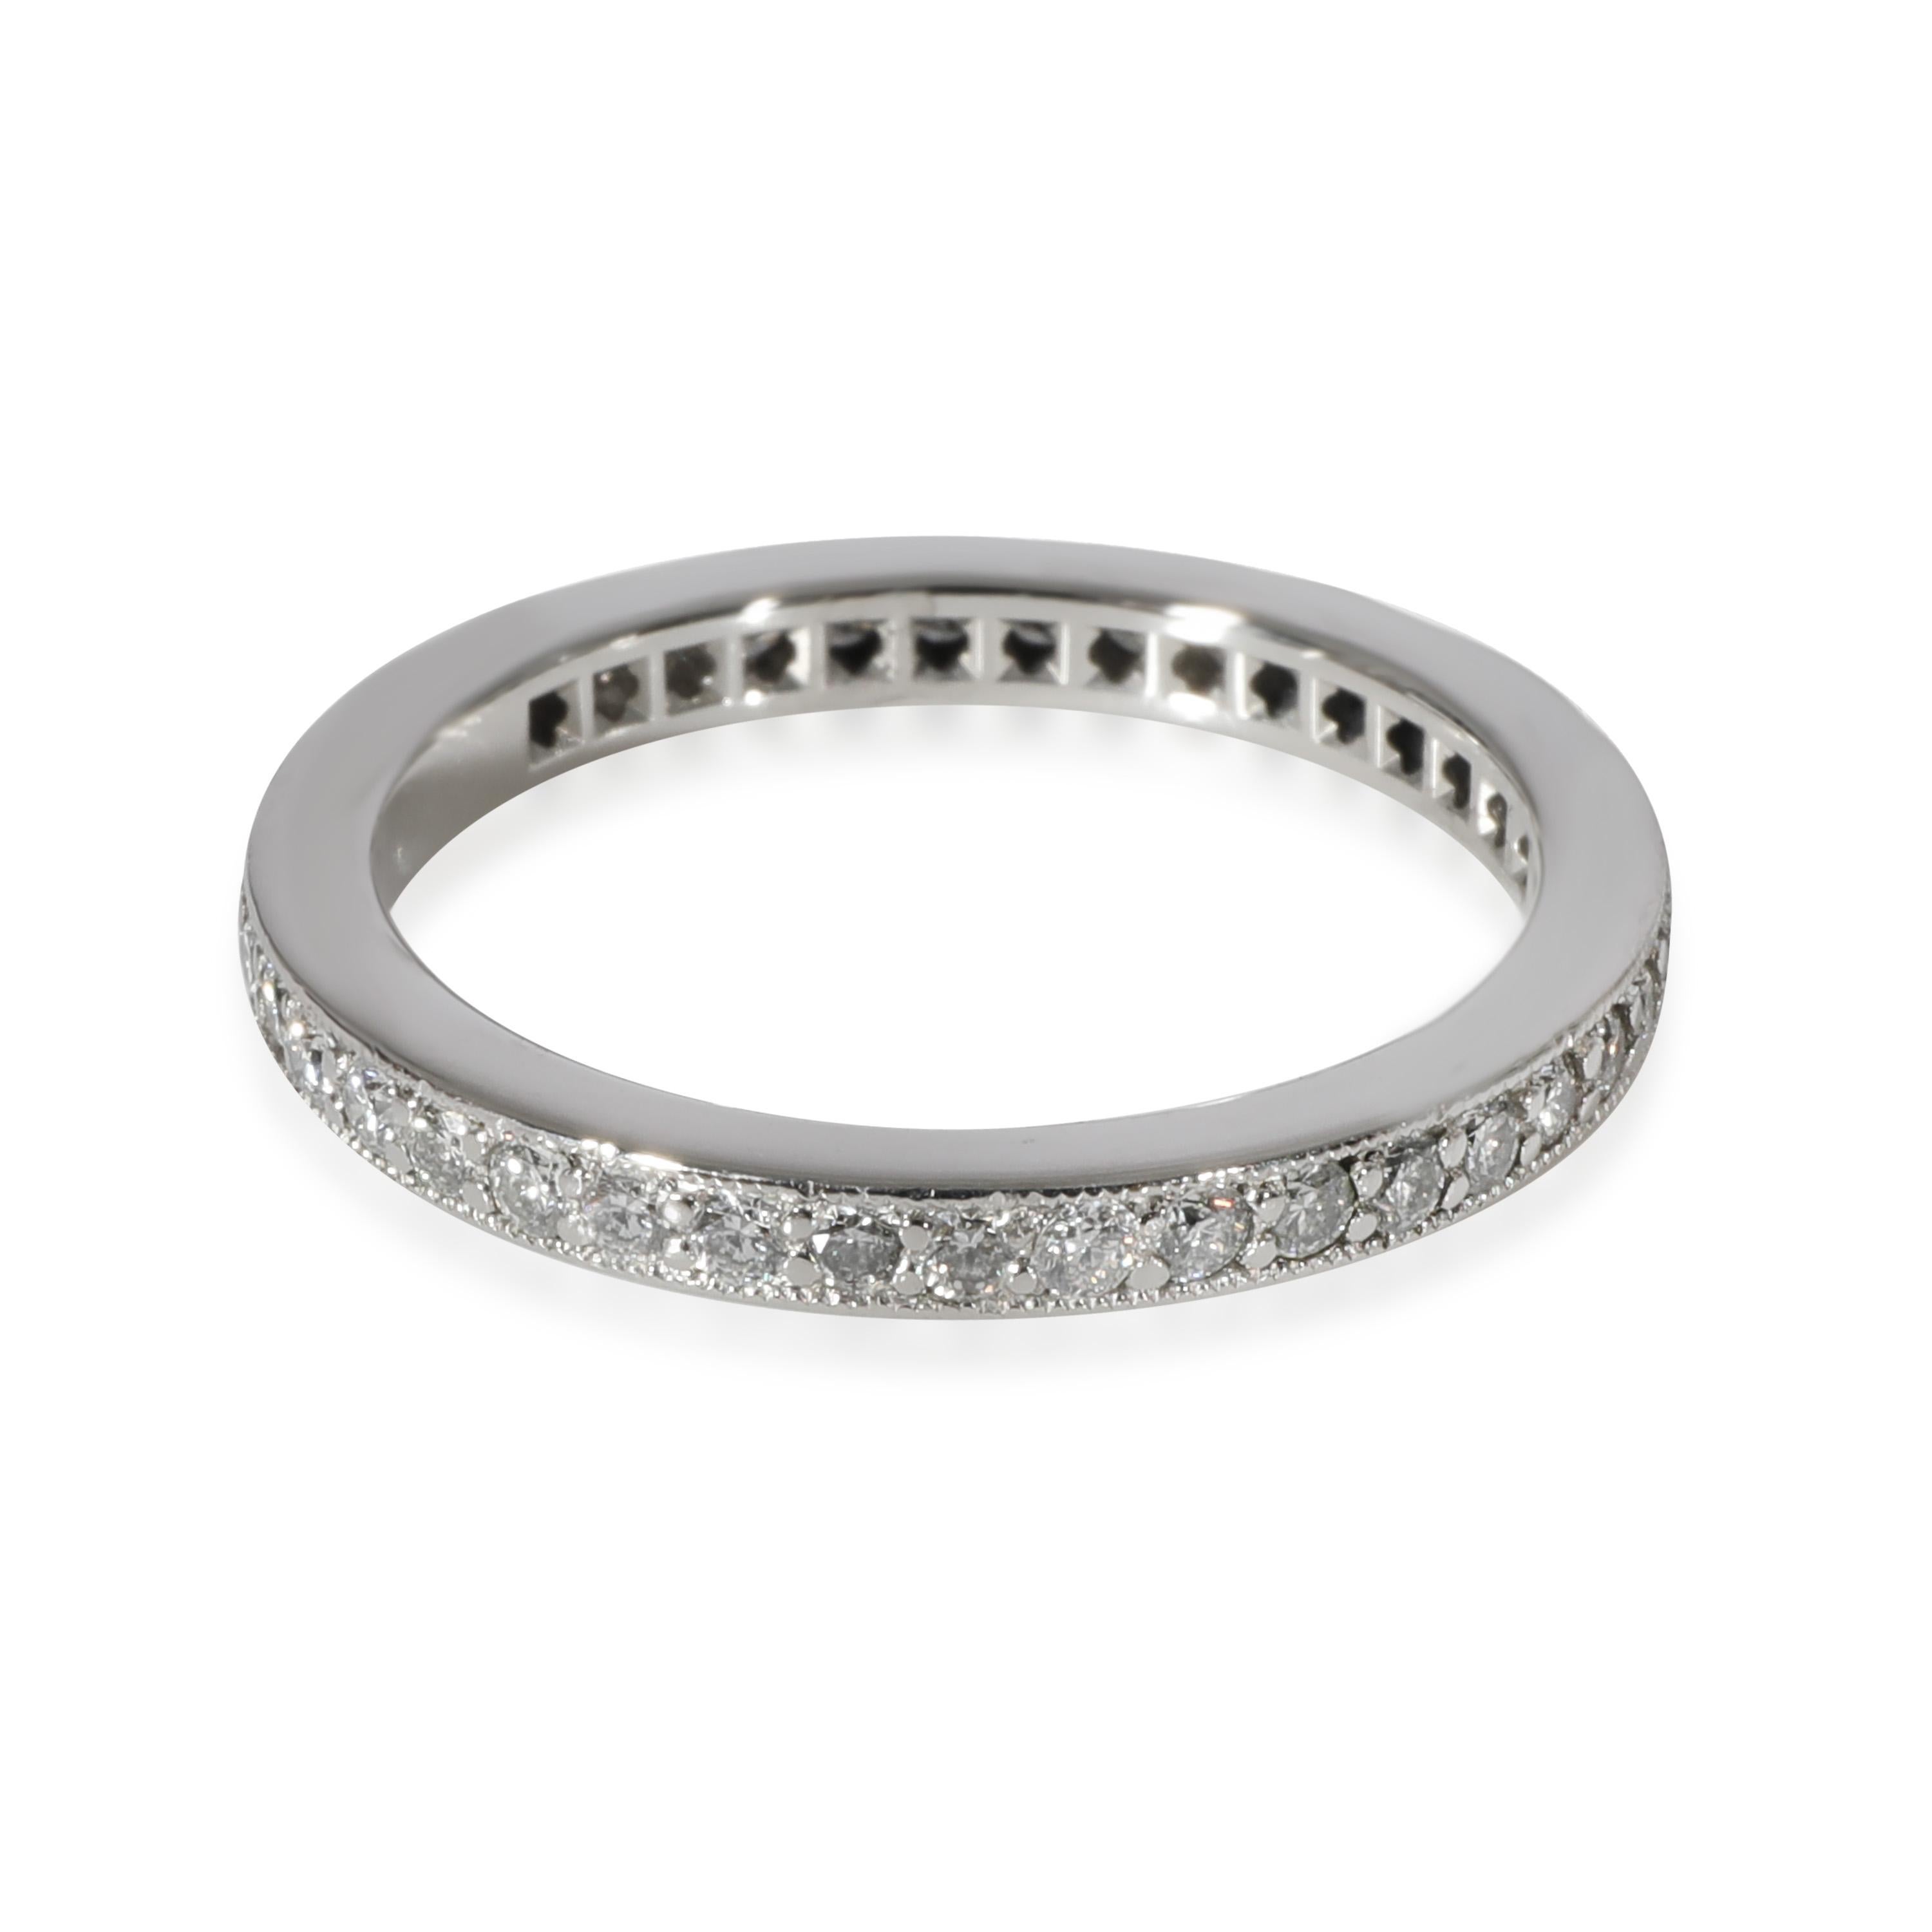 Tiffany & Co. Legacy Diamond Eternity Band in Platinum 0.40 CTW

PRIMARY DETAILS
SKU: 127341
Listing Title: Tiffany & Co. Legacy Diamond Eternity Band in Platinum 0.40 CTW
Condition Description: Retails for 4100 USD. In excellent condition and